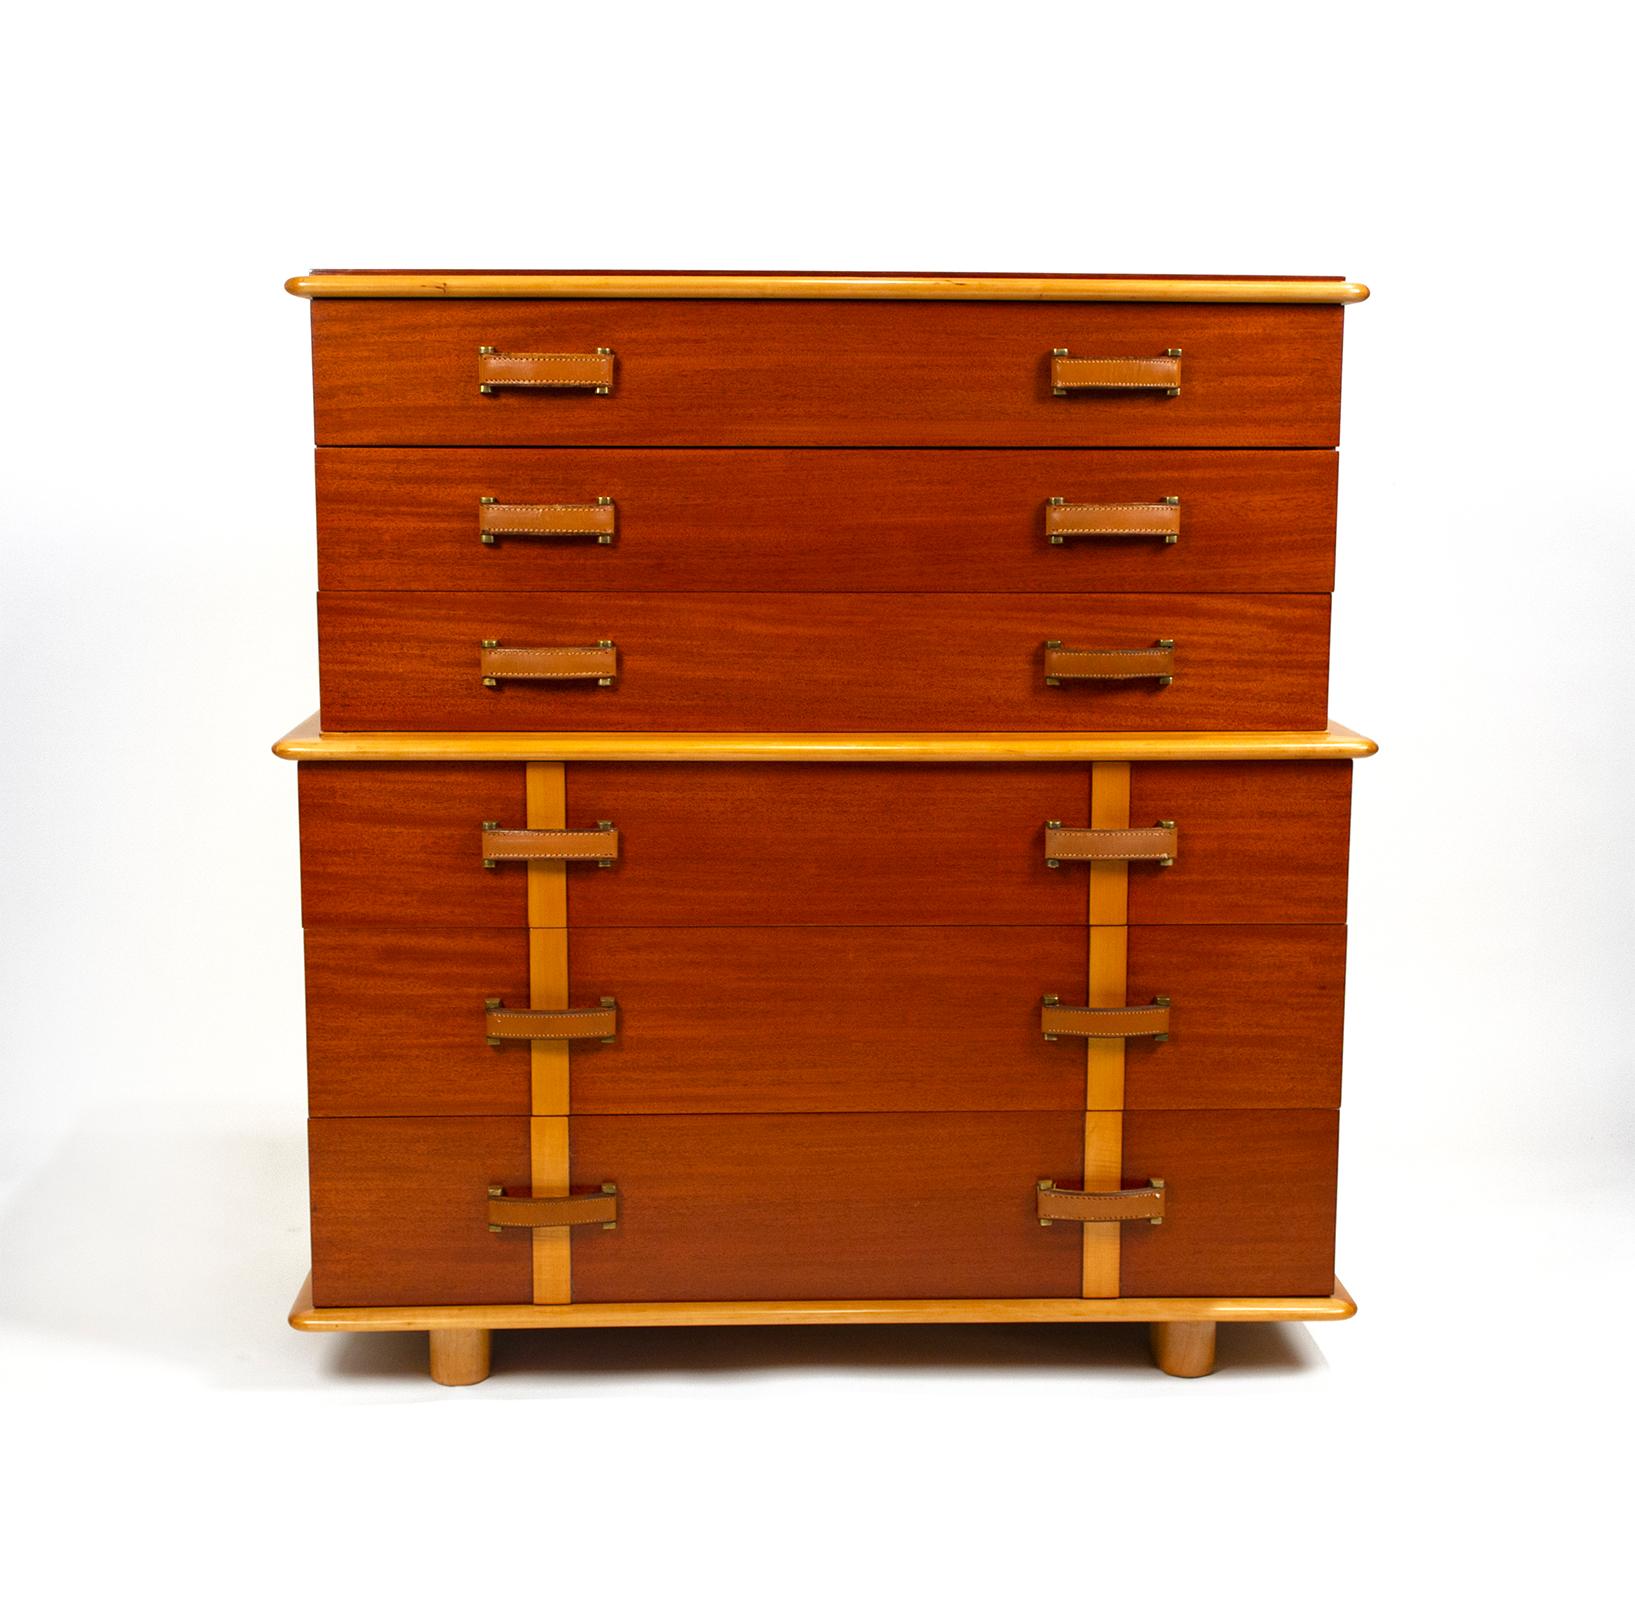 Cabinet constructed of Philippine mahogany and rock maple featuring 6 drawers with original hand-stitched leather handles attached with solid brass hardware. The interiors of the drawers are oak. Manufactured by the Johnson Furniture company in